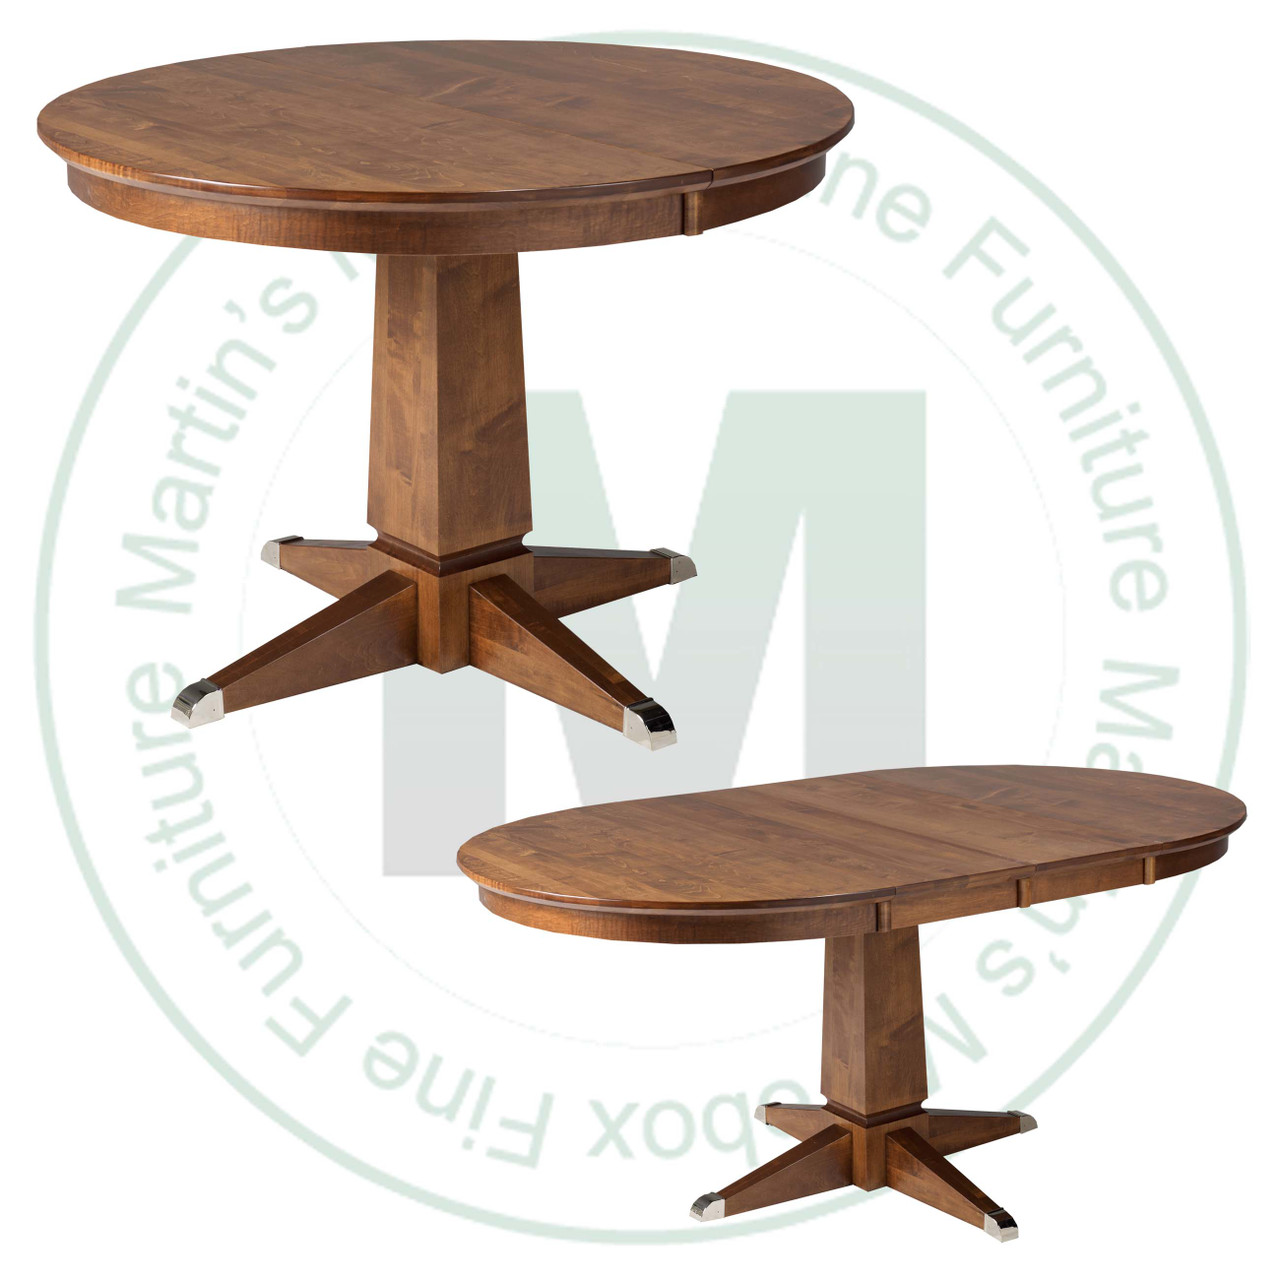 Maple Danish Single Pedestal Table 42''D x 48''W x 30''H With 2 - 12'' Leaves